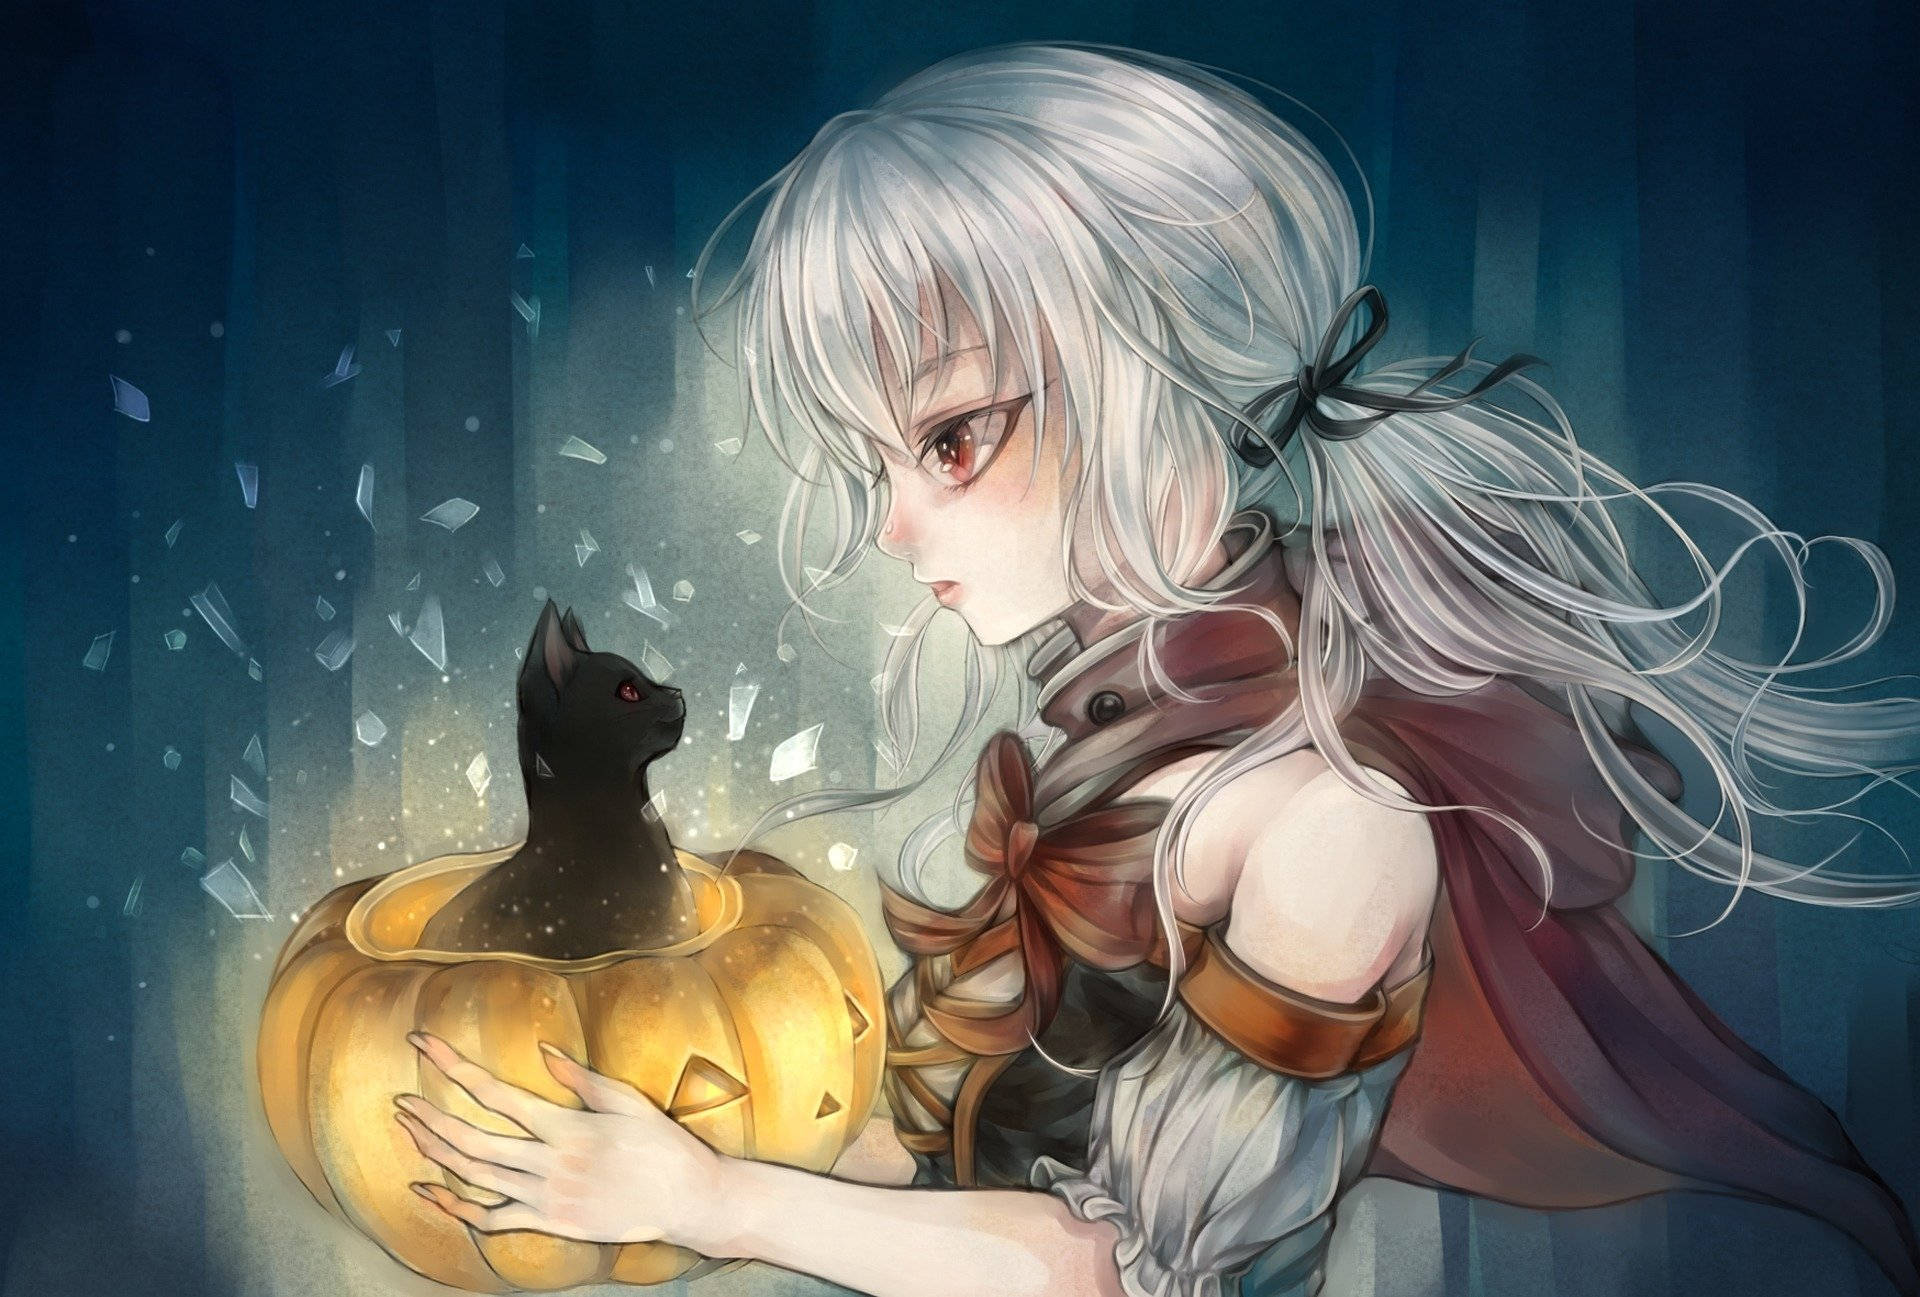 Join in on the Halloween fun with this Anime themed Halloween costume! Wallpaper